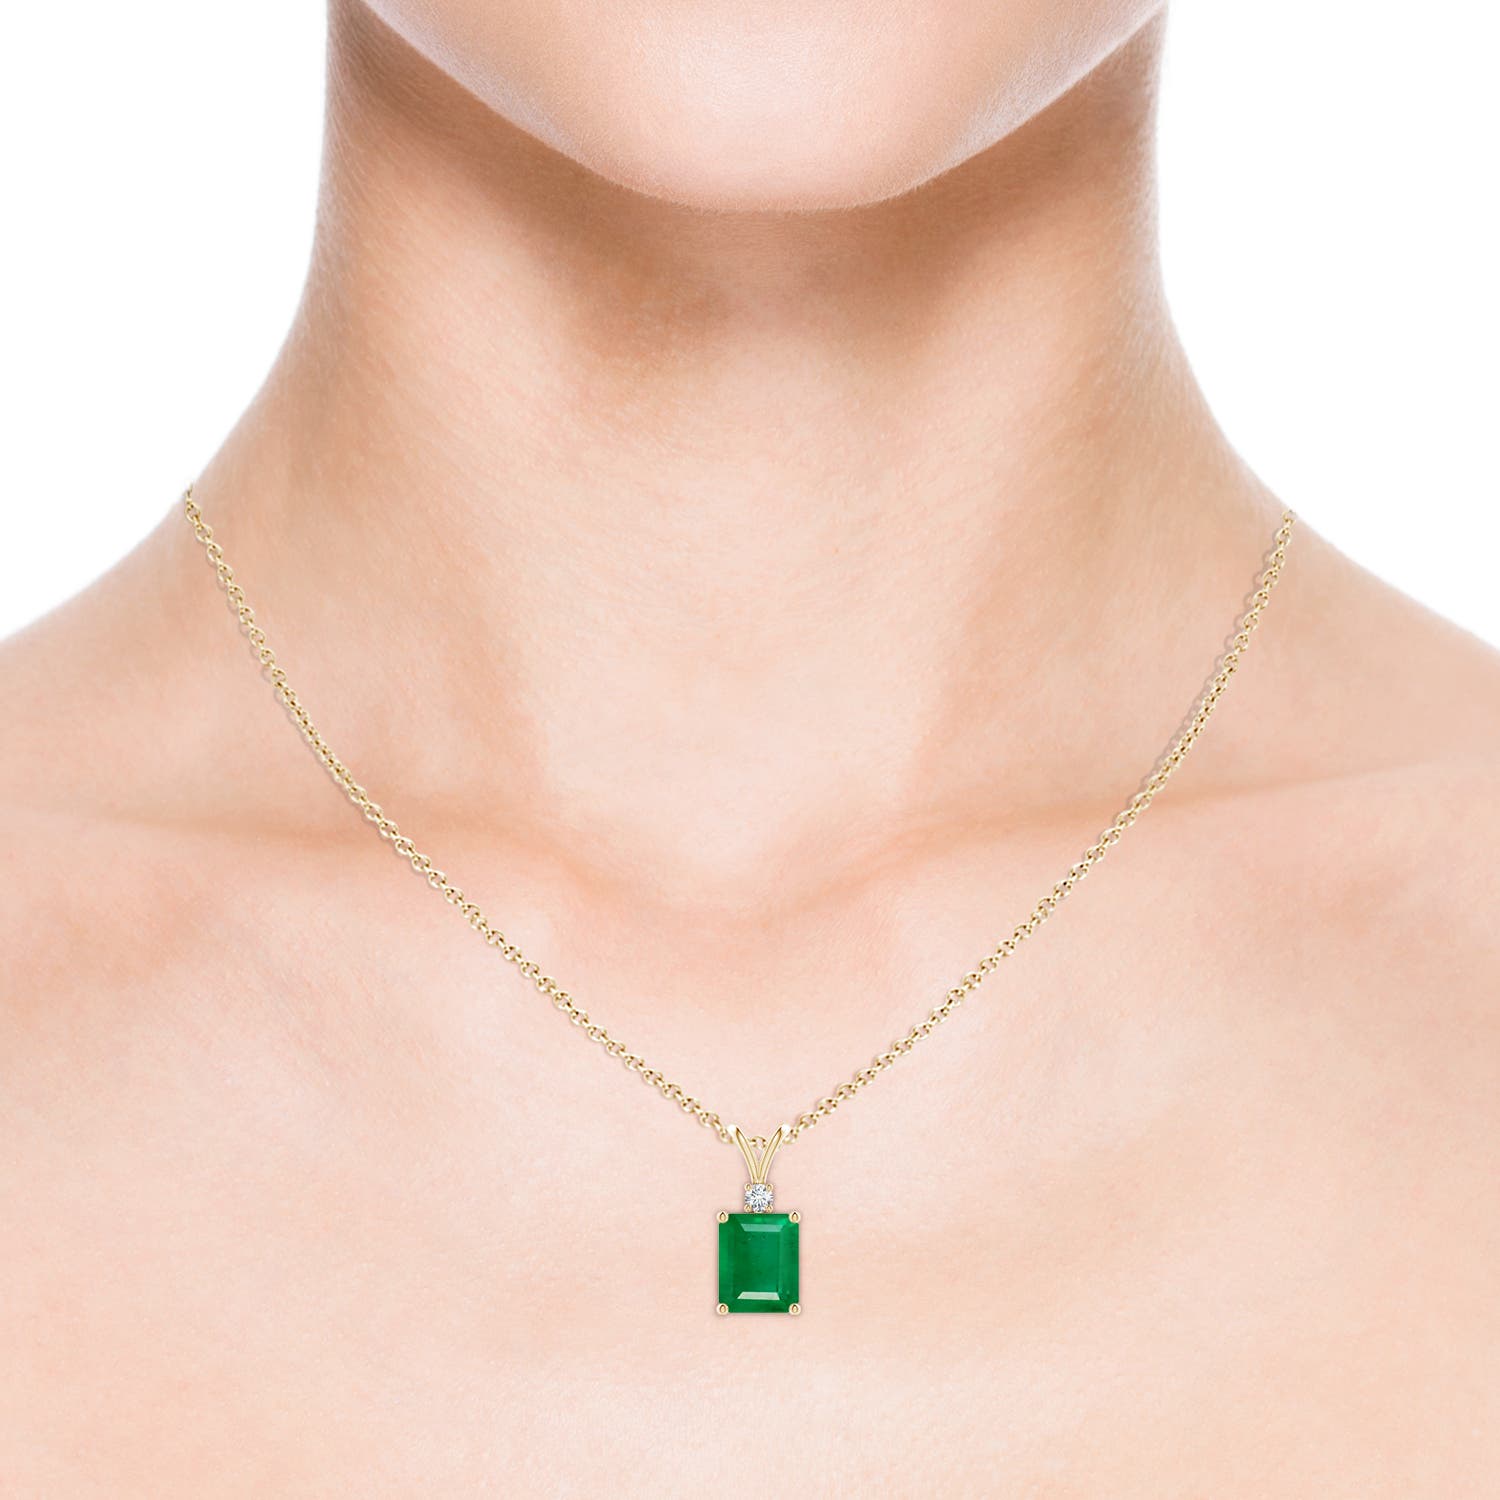 AA - Emerald / 2.96 CT / 14 KT Yellow Gold